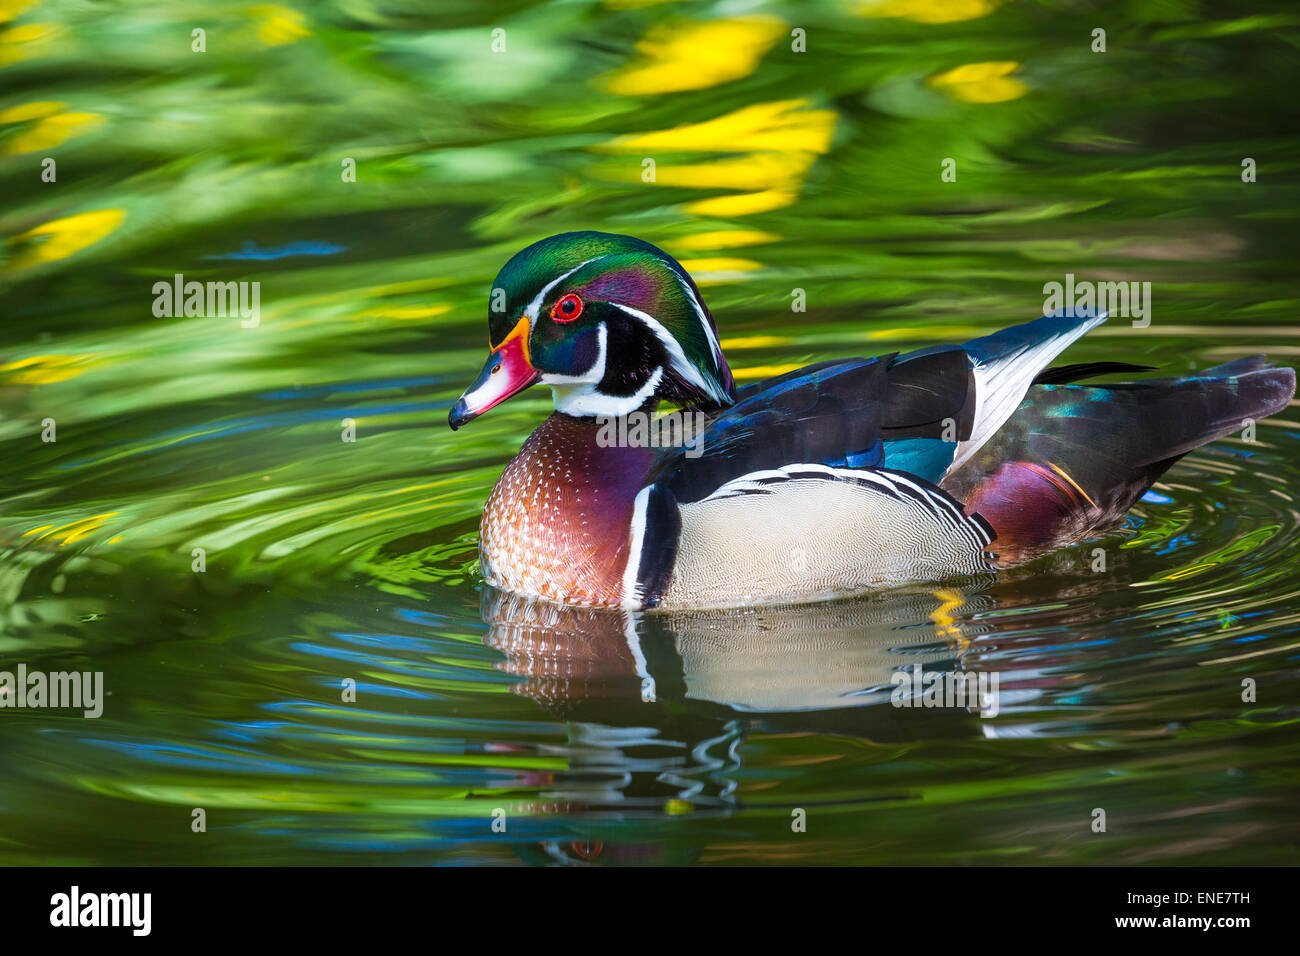 The wood duck or Carolina duck (Aix sponsa) is a species of perching duck found in North America. Stock Photo